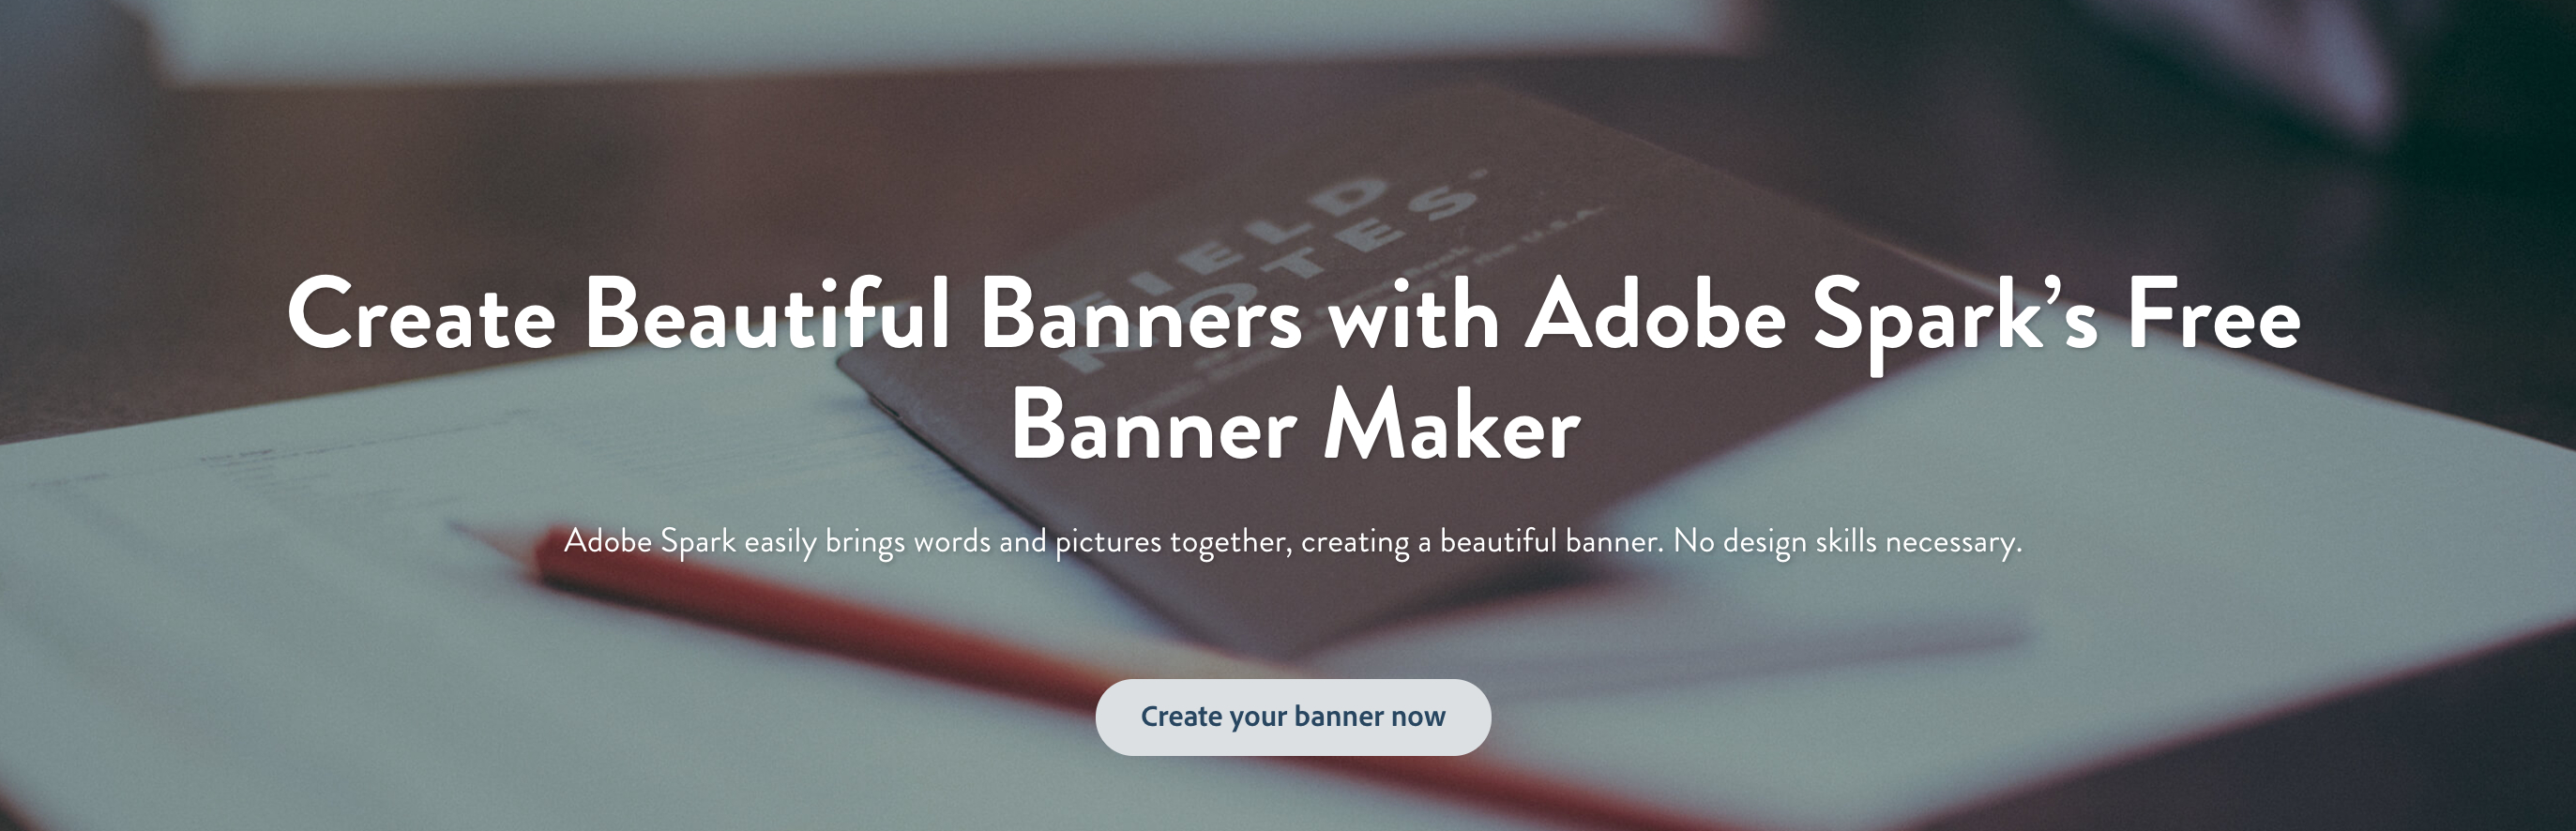 Banner Maker: Create Beautiful Banners Easily, For Free | Adobe Spark - Free Printable Banner Maker